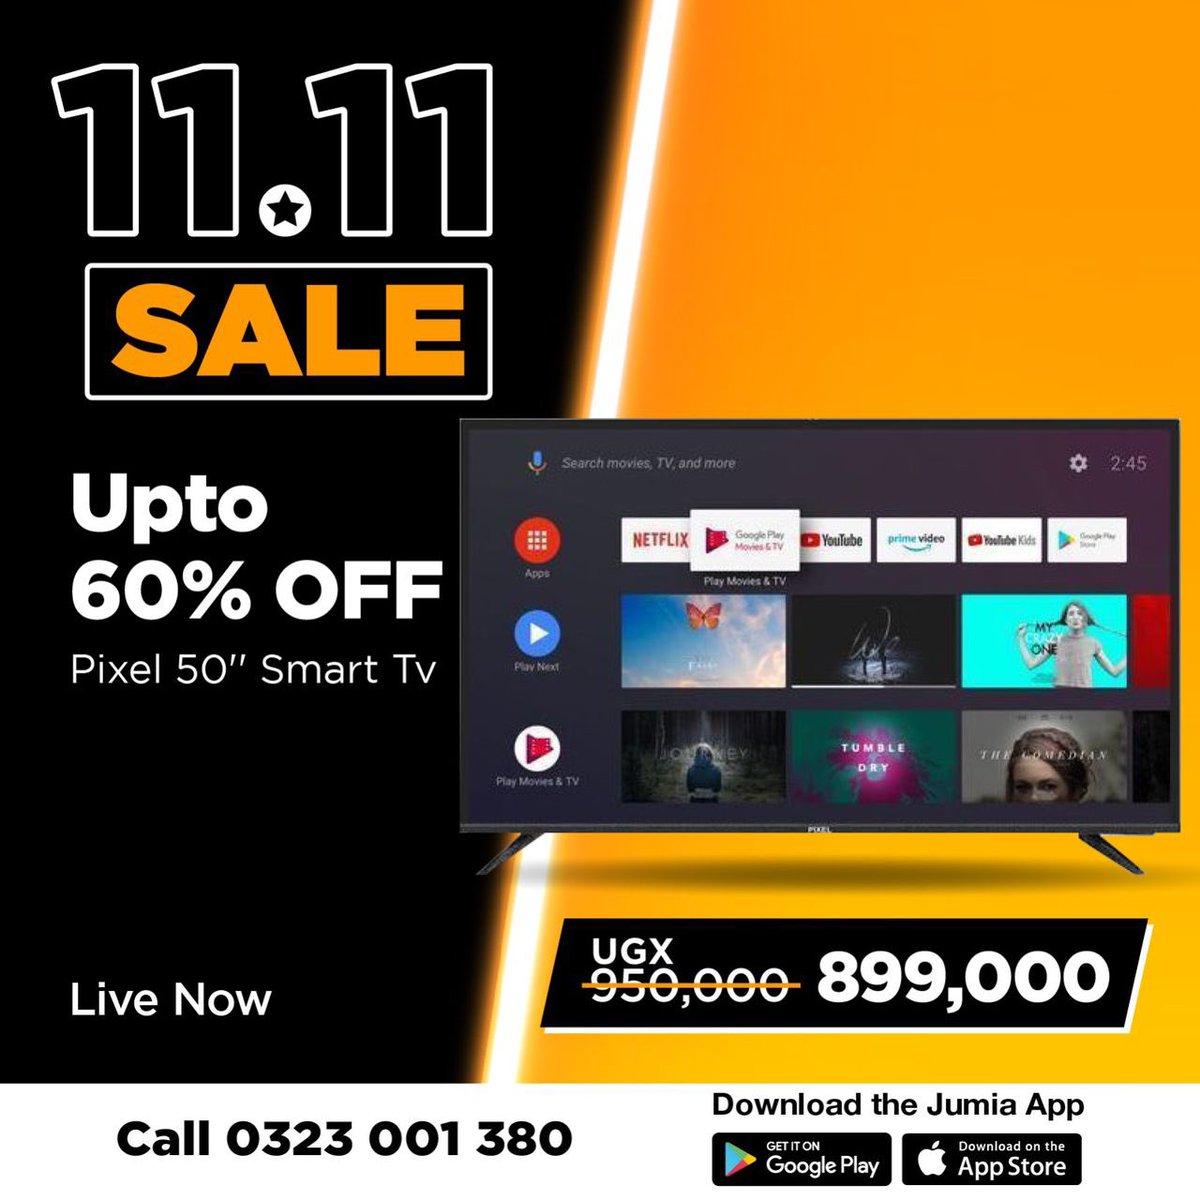 11:11 SALE is live! Get up to 60% off when you shop today! #JumiaBlackFriday Shop Now >> bit.ly/49gTWuR